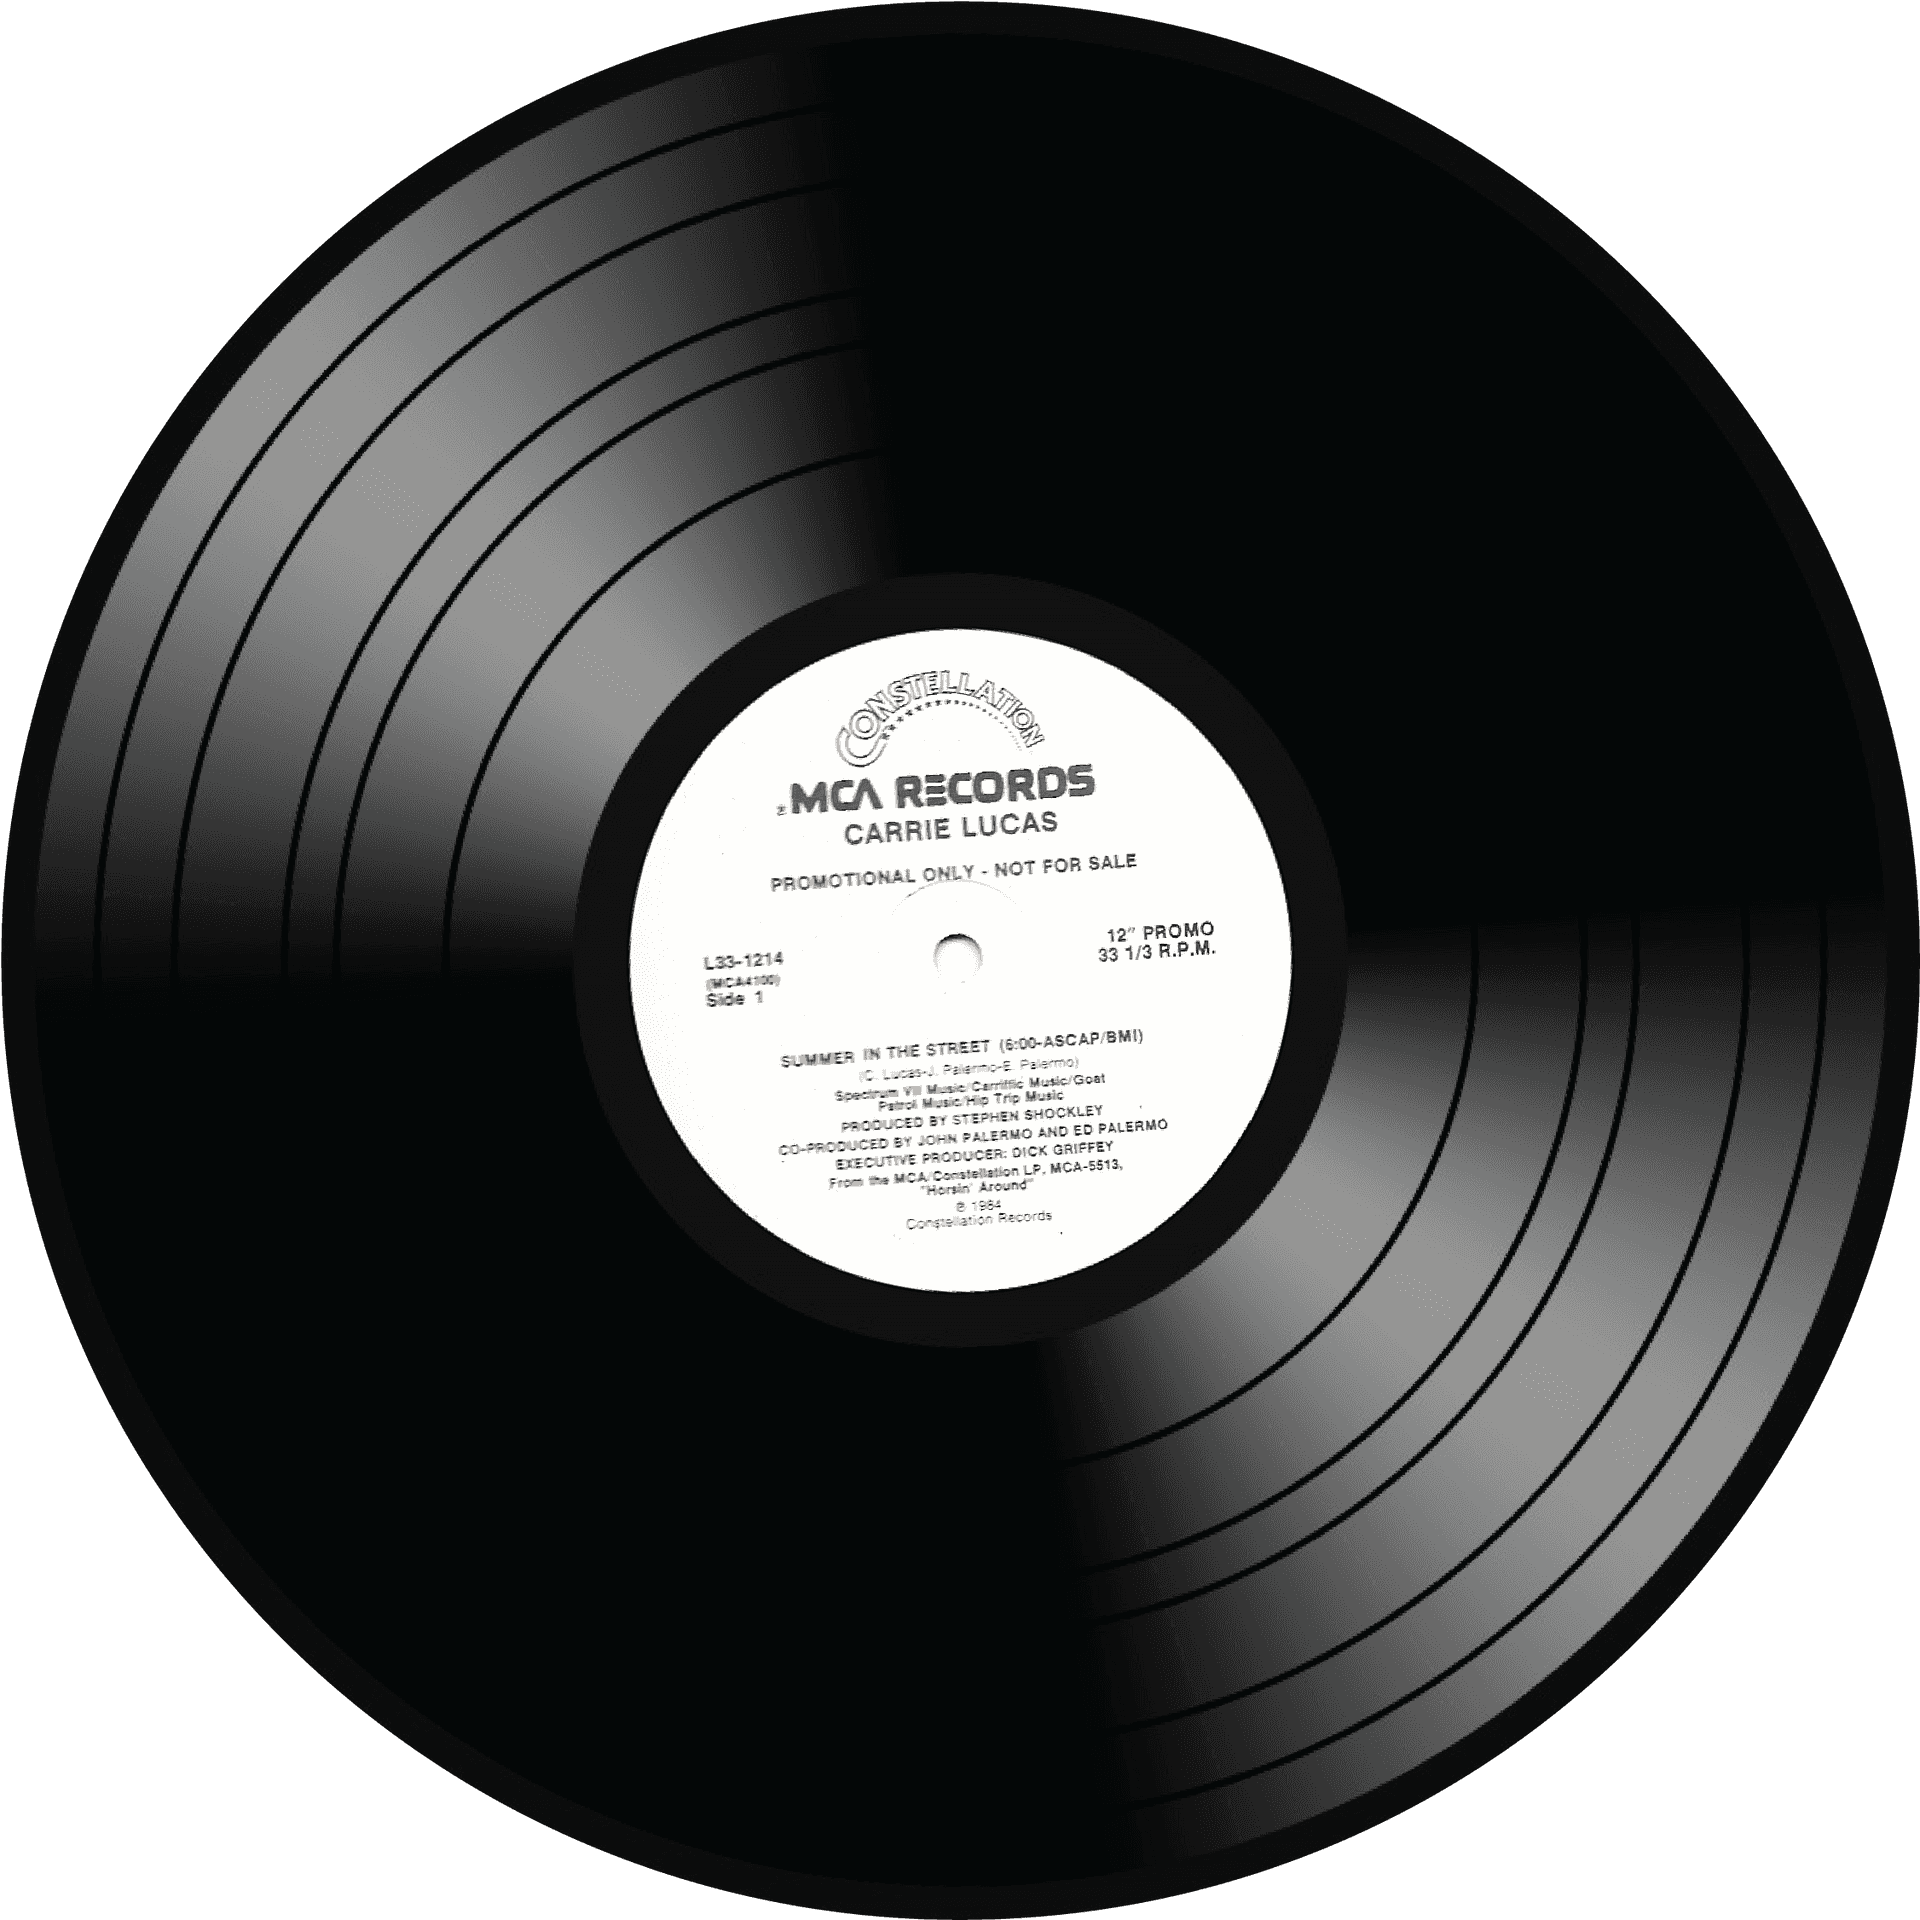 Vinyl Record Carrie Lucas Promotional PNG